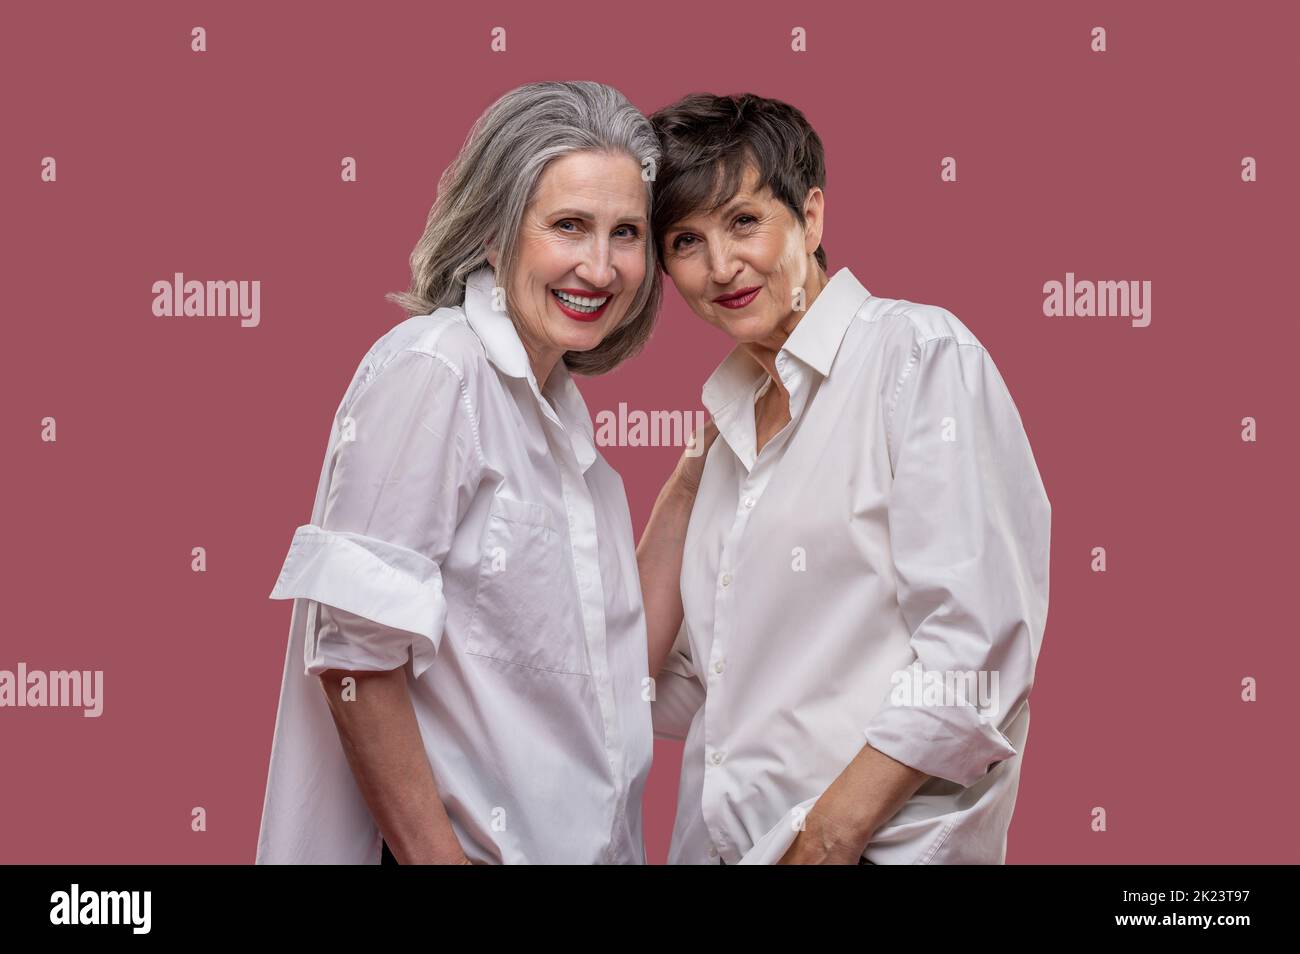 Two mature women in white shirts looking confident Stock Photo